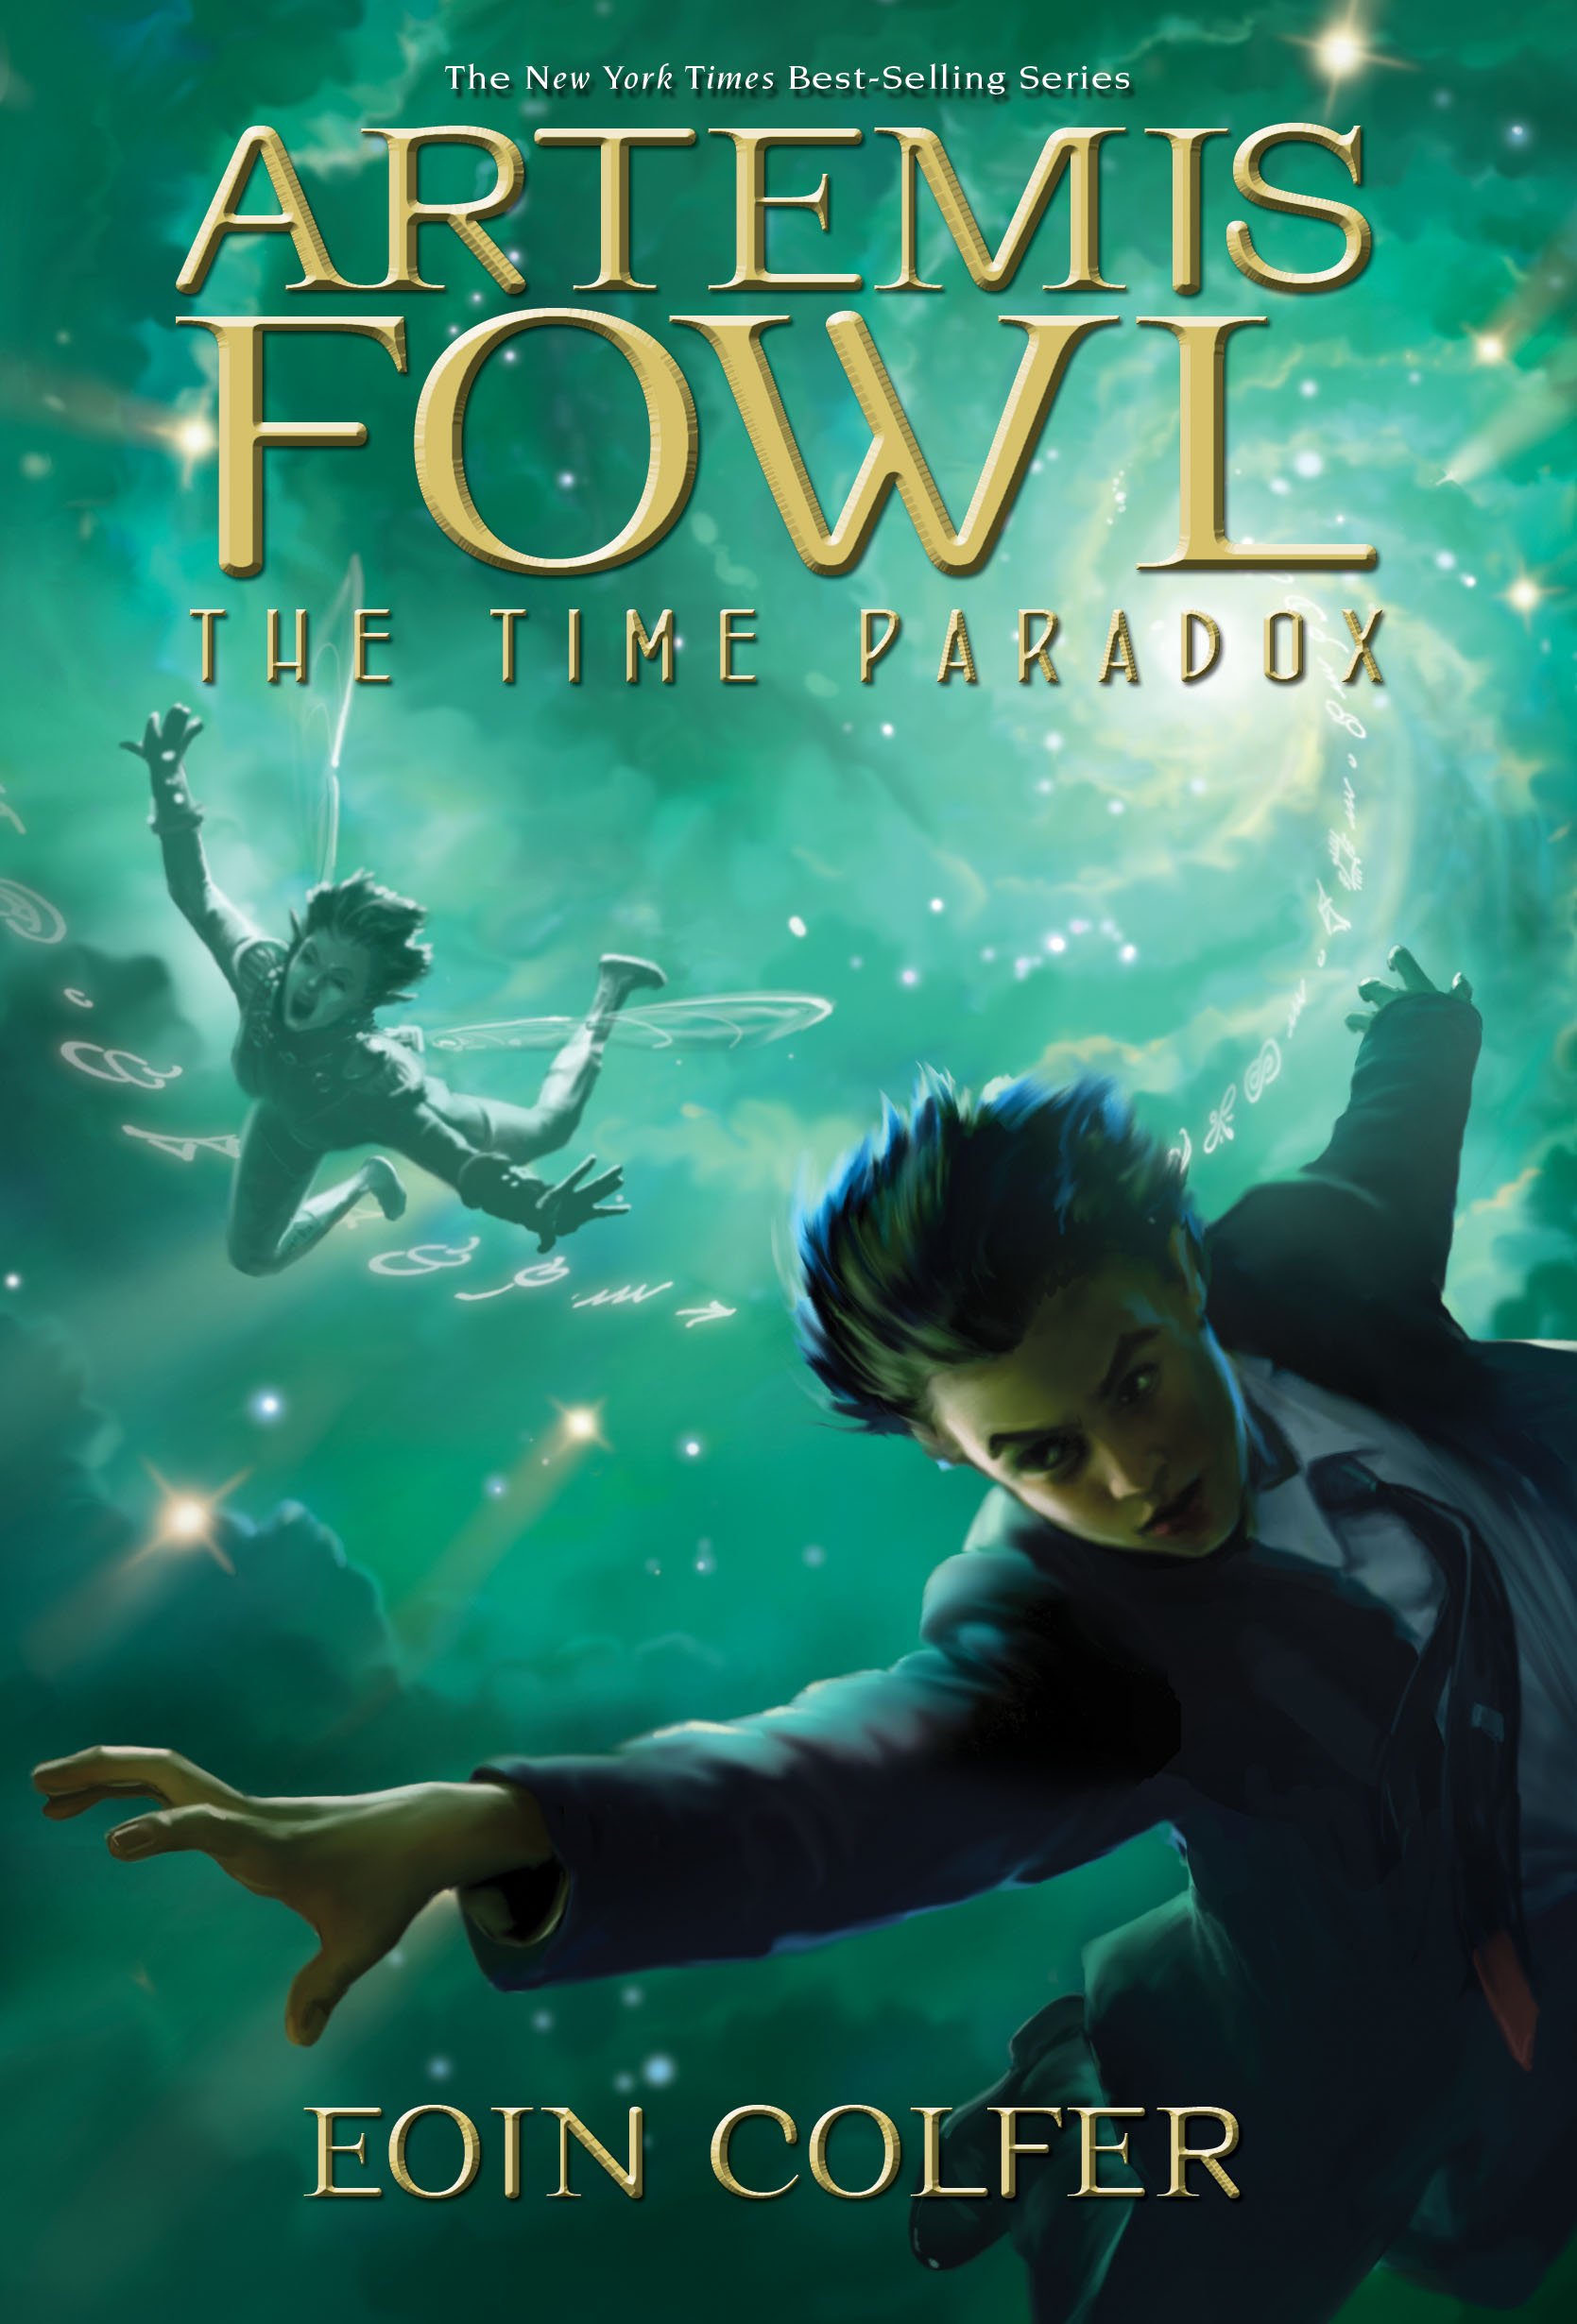 Artemis Fowl; The Time Paradox by Eoin Colfer